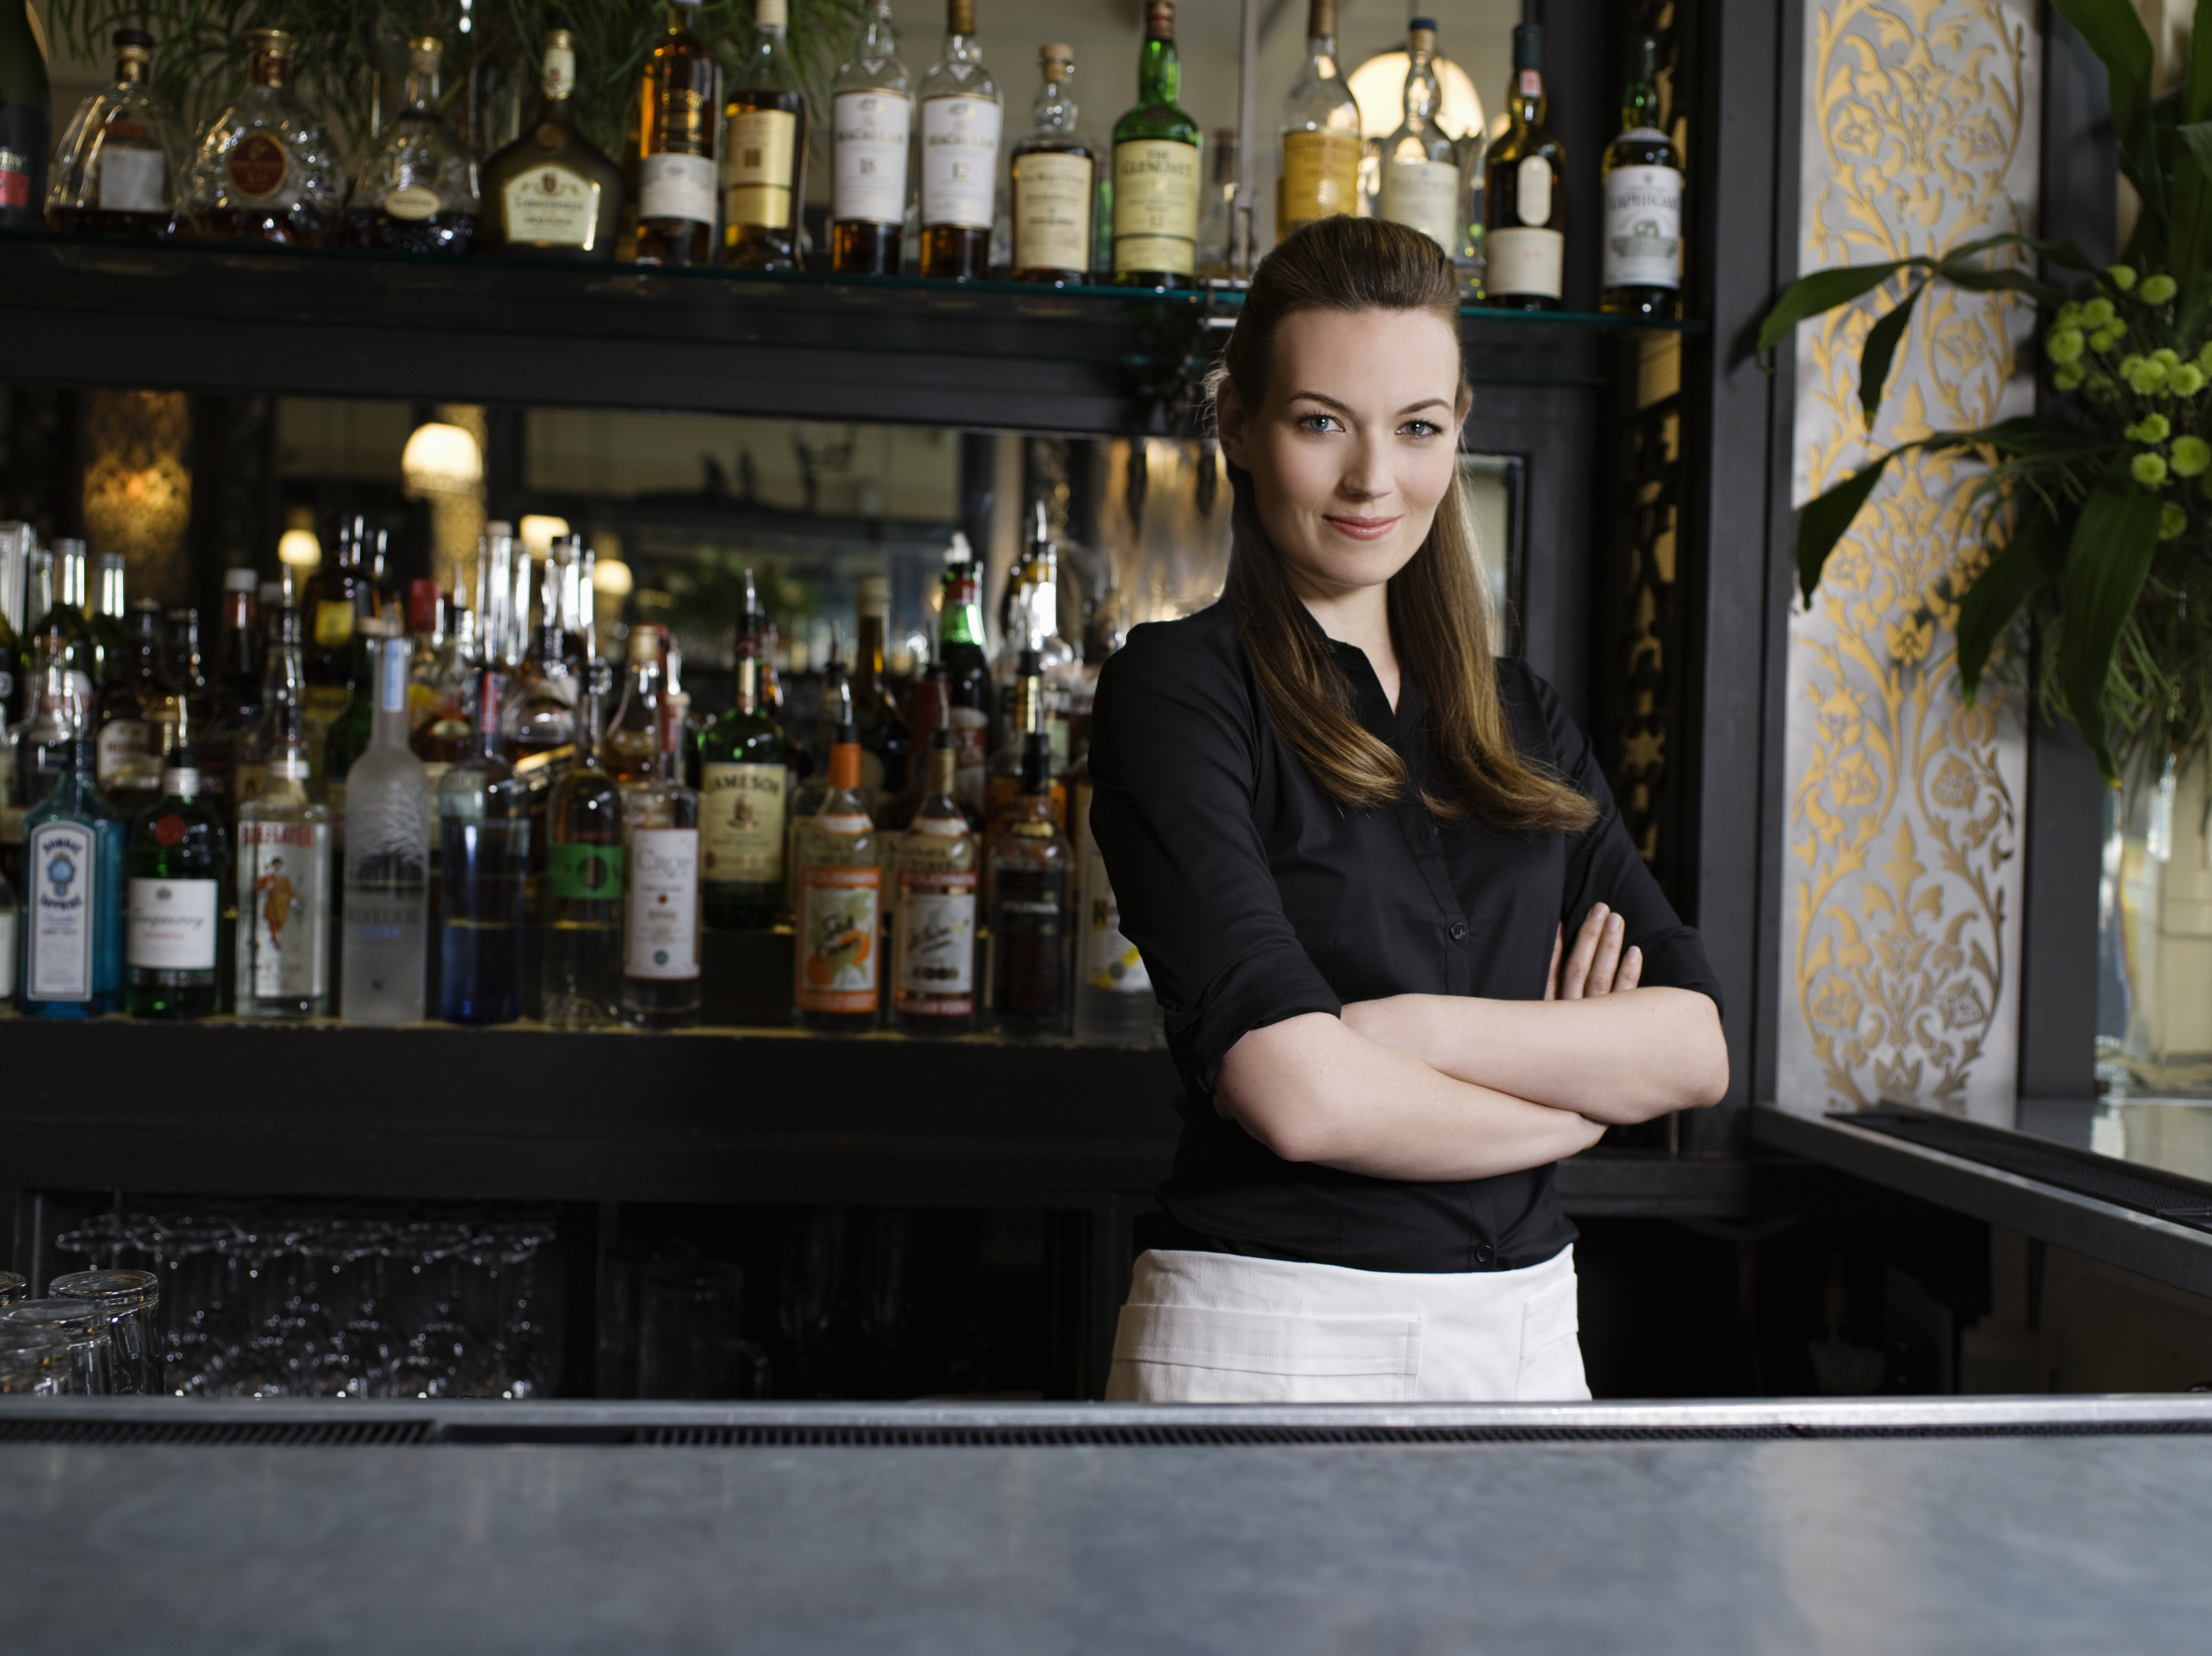 A confident female bartender standing behind the bar | Source: Getty Images